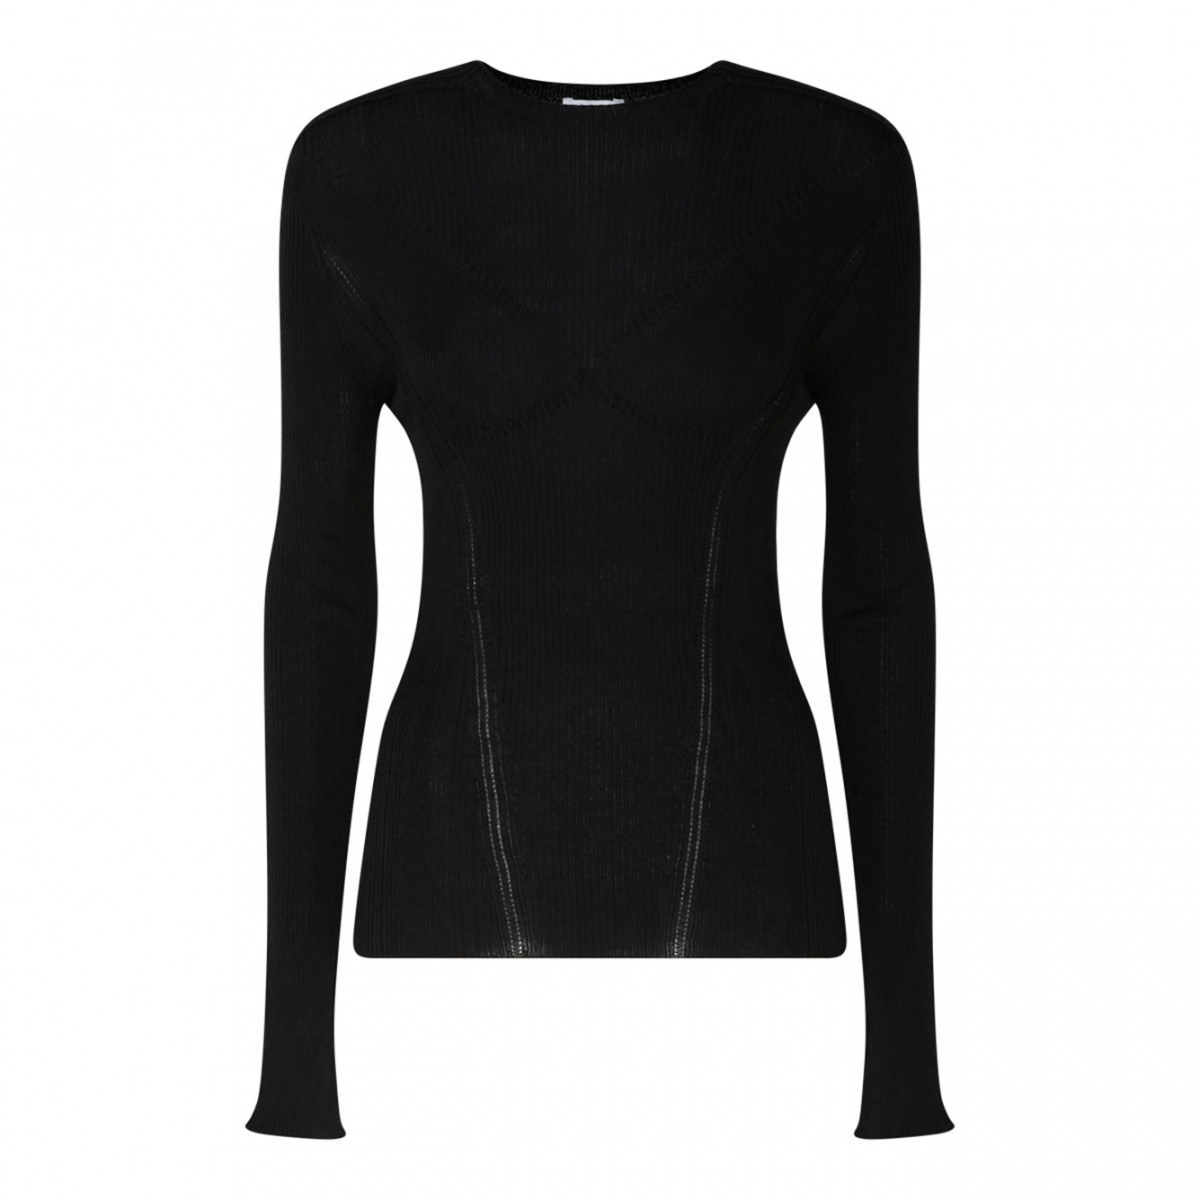 Lanvin Black Cashmere Long Sleeve Ribbed Knit Top